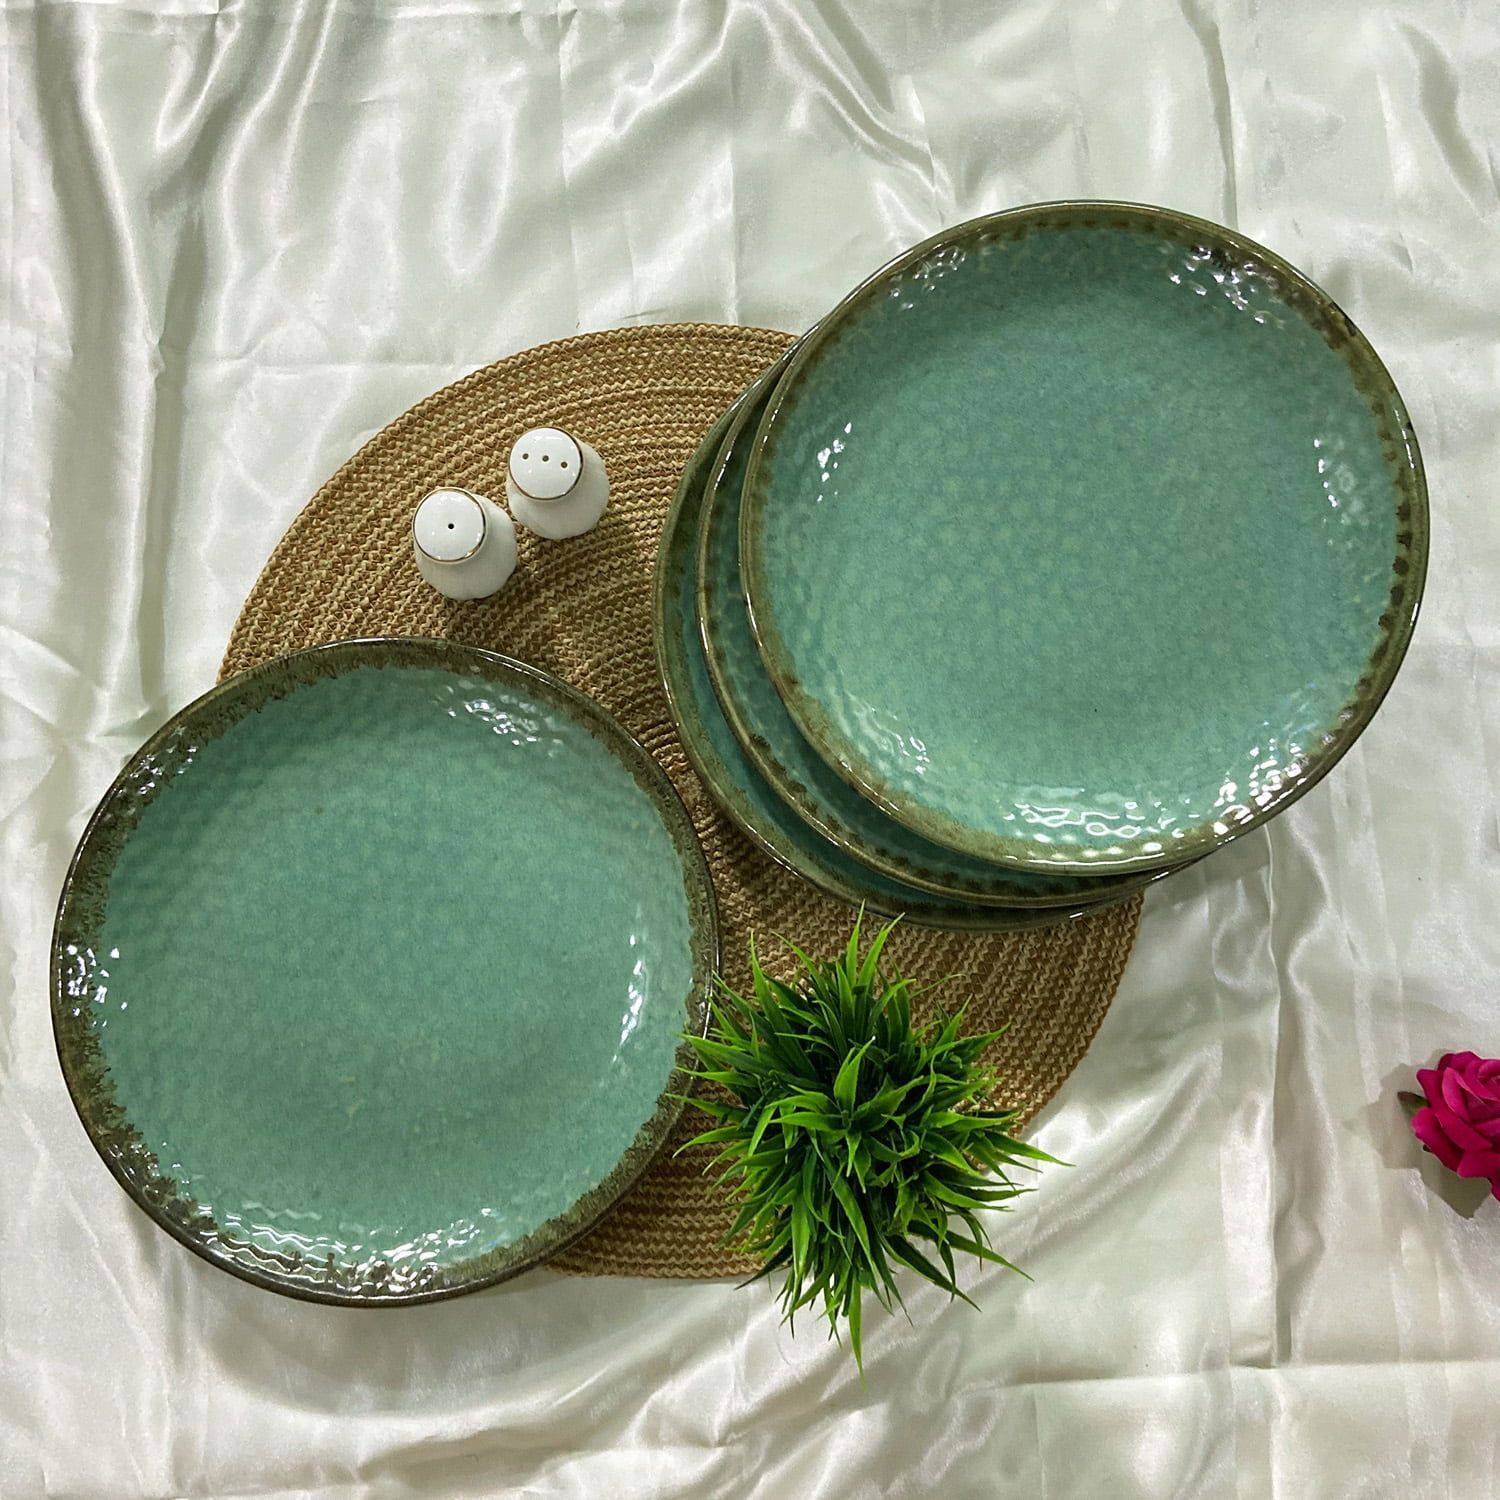 Ceramic Dining Sea Green Hammered Pattern Ceramic 10.2 Inches Dinner Plates Set of 4